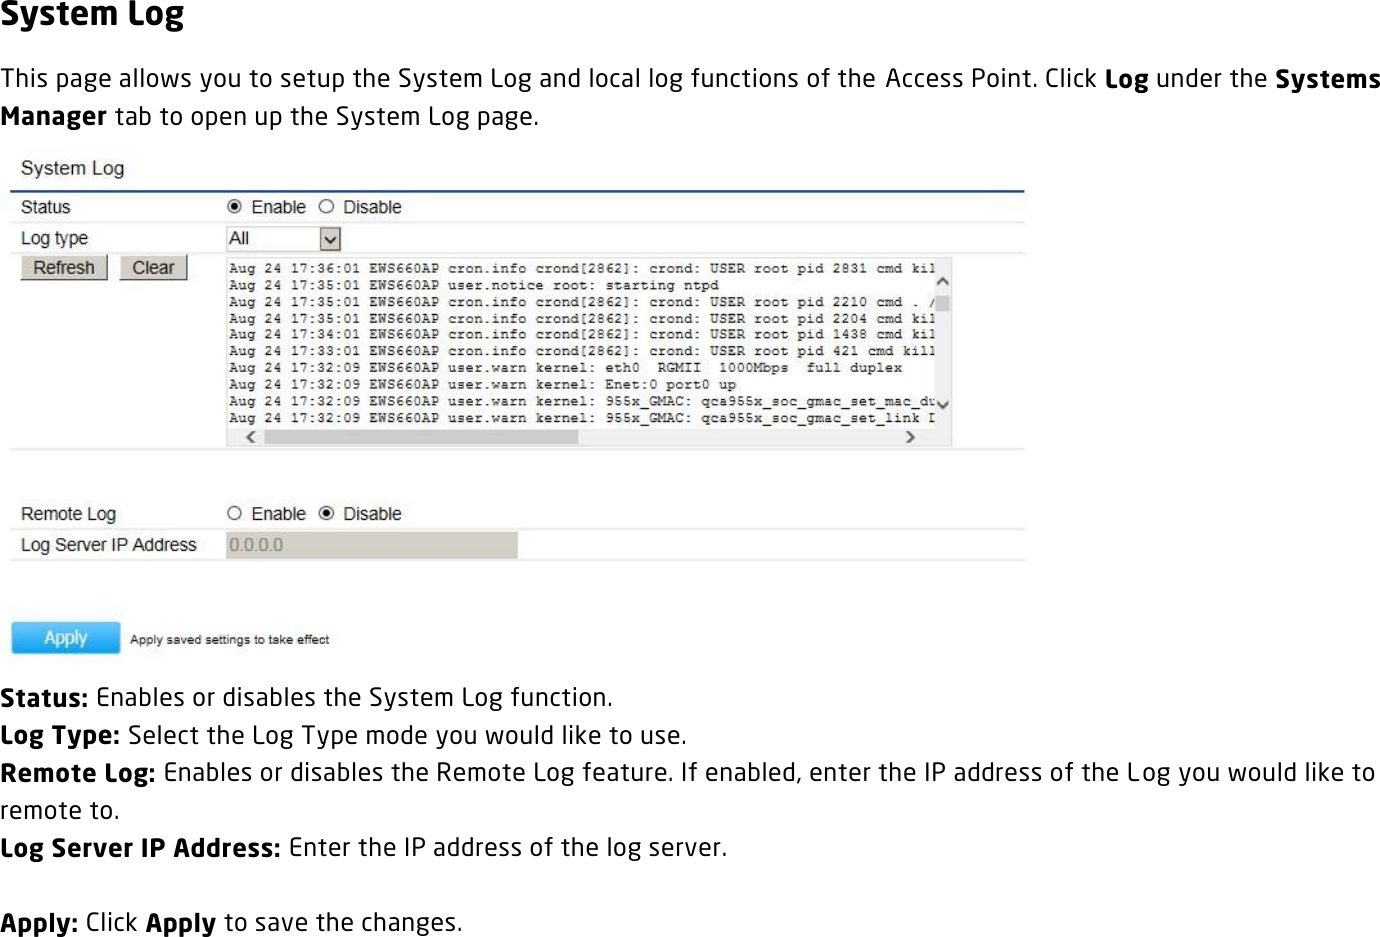 System Log This page allows you to setup the System Log and local log functions of the Access Point. Click Log under the Systems Manager tab to open up the System Log page.  Status: Enables or disables the System Log function. Log Type: Select the Log Type mode you would like to use. Remote Log: Enables or disables the Remote Log feature. If enabled, enter the IP address of the Log you would like to remote to. Log Server IP Address: Enter the IP address of the log server.  Apply: Click Apply to save the changes.   